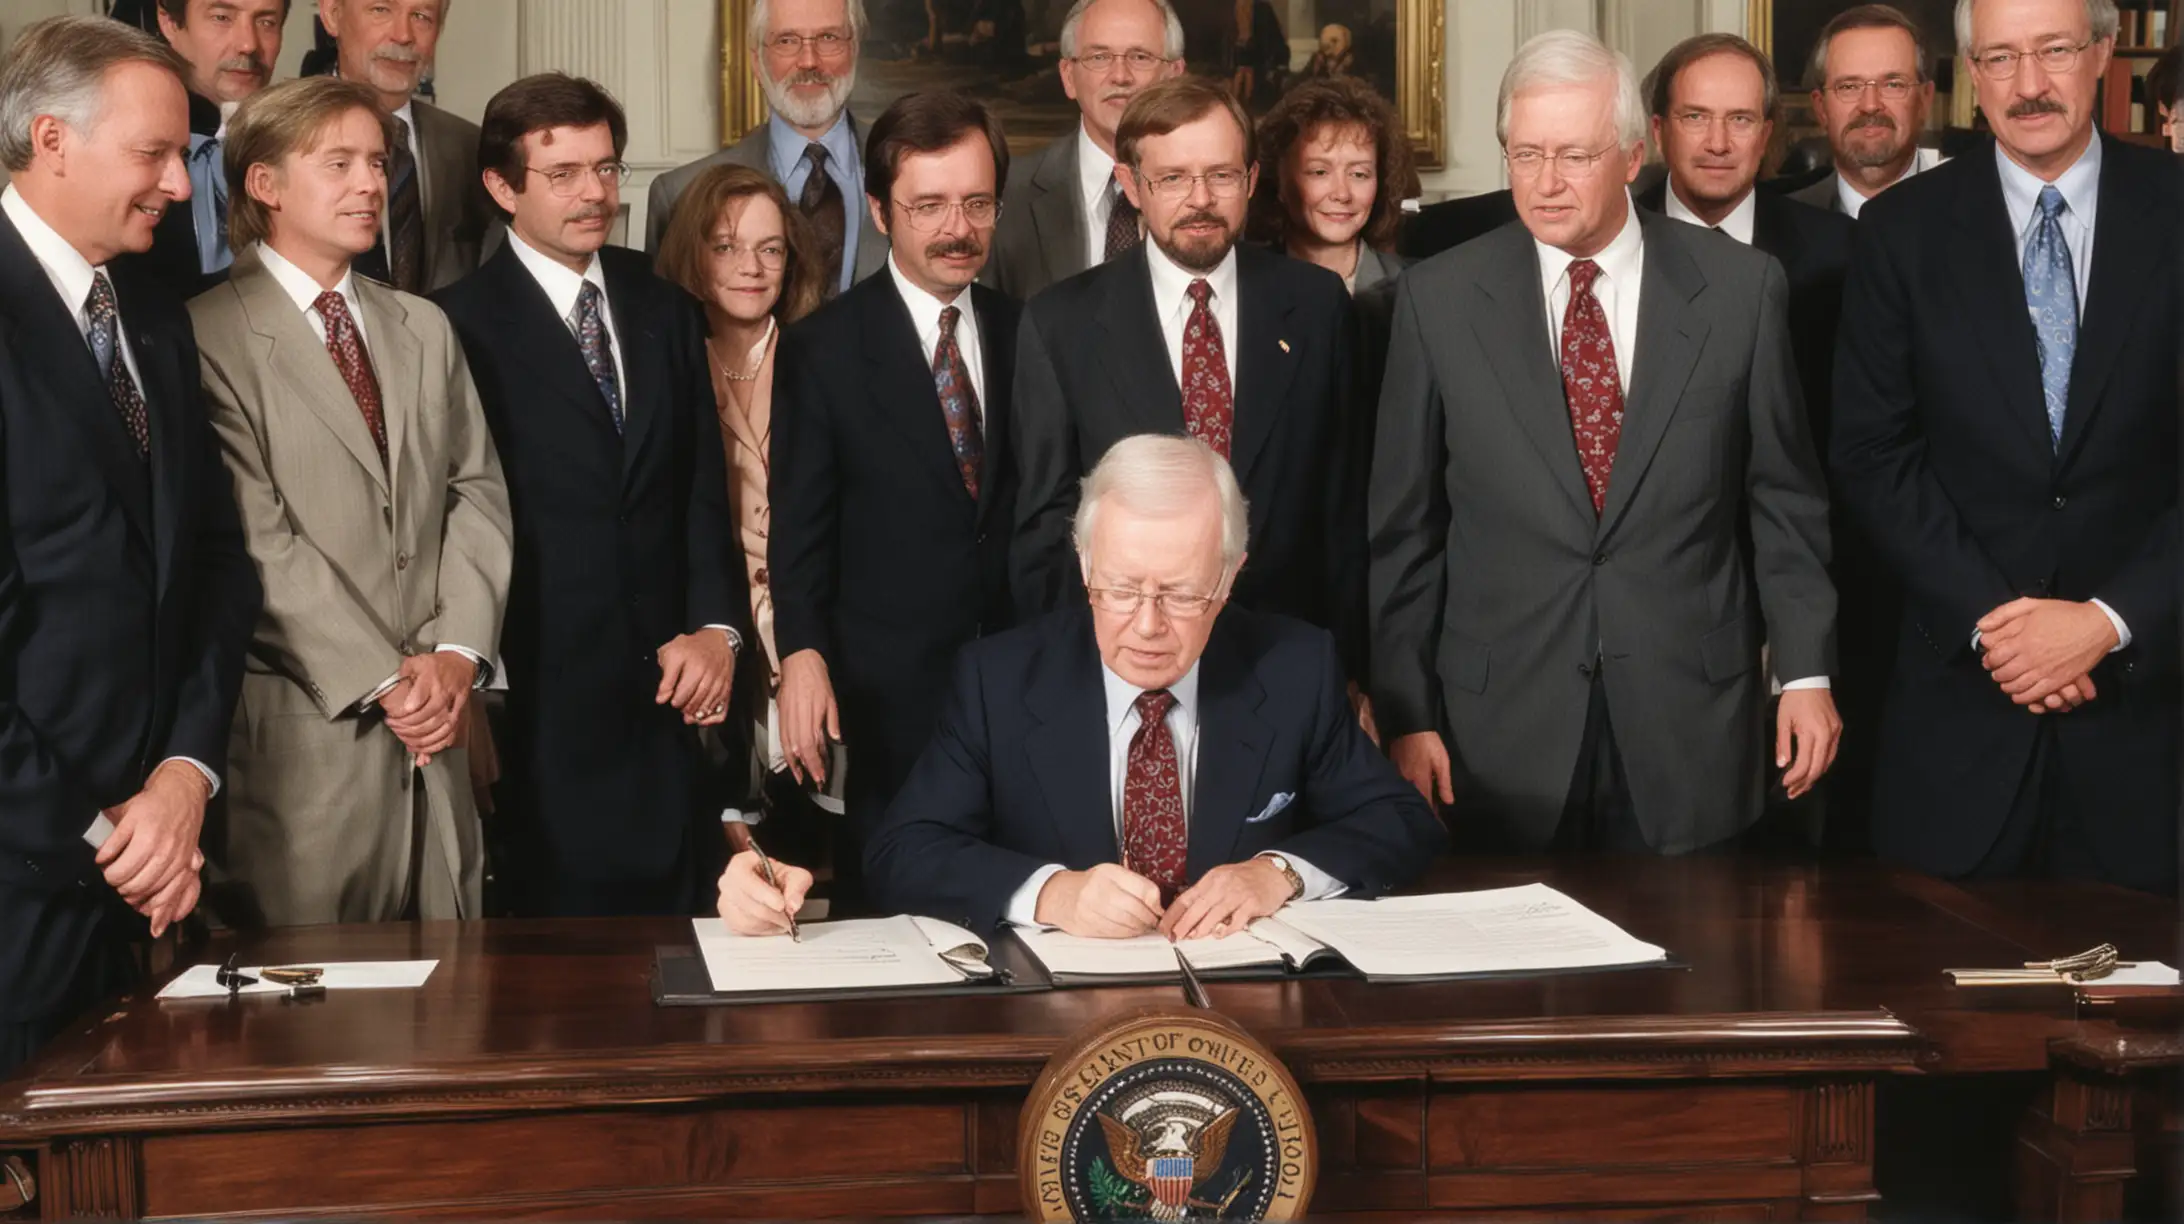 Jimmy Carter Signing Department of Energy Legislation with Renewable Energy Experts